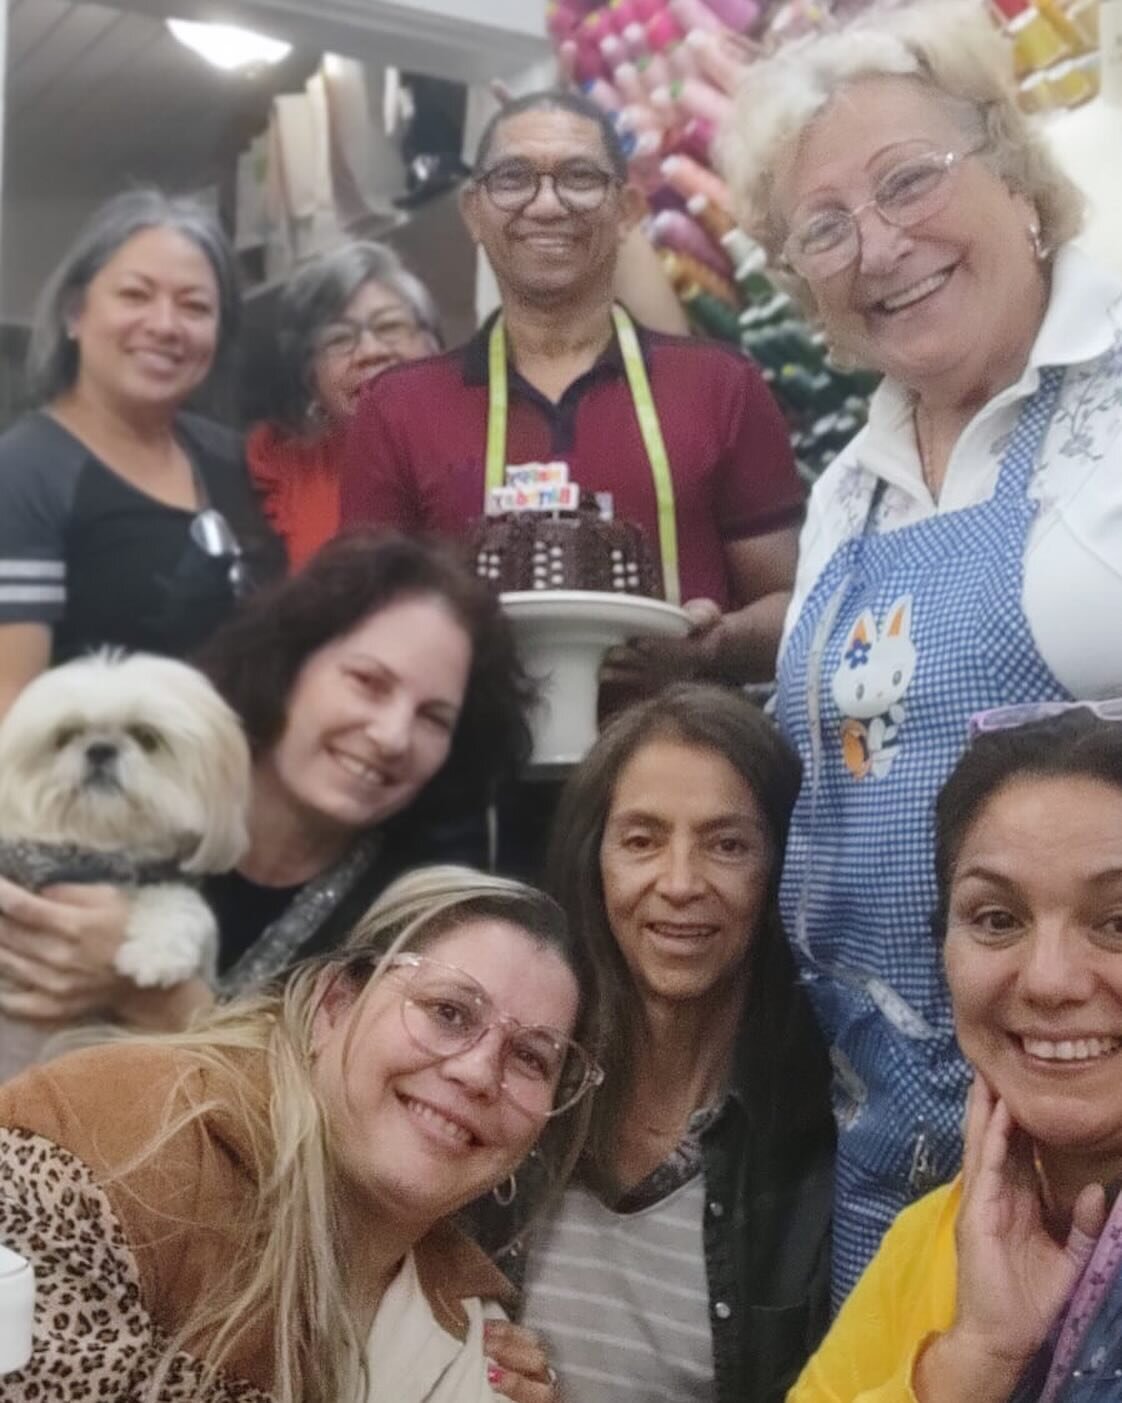 Another #happybirthday with @eligio.duran 10 years together and counting! #equipo @queendomheadquarters @rosatovar1958 @ibelice55 Gizmo @sewonsettailor Ingrid @danielaroxanaaguirre @lulup_a_r_i_s